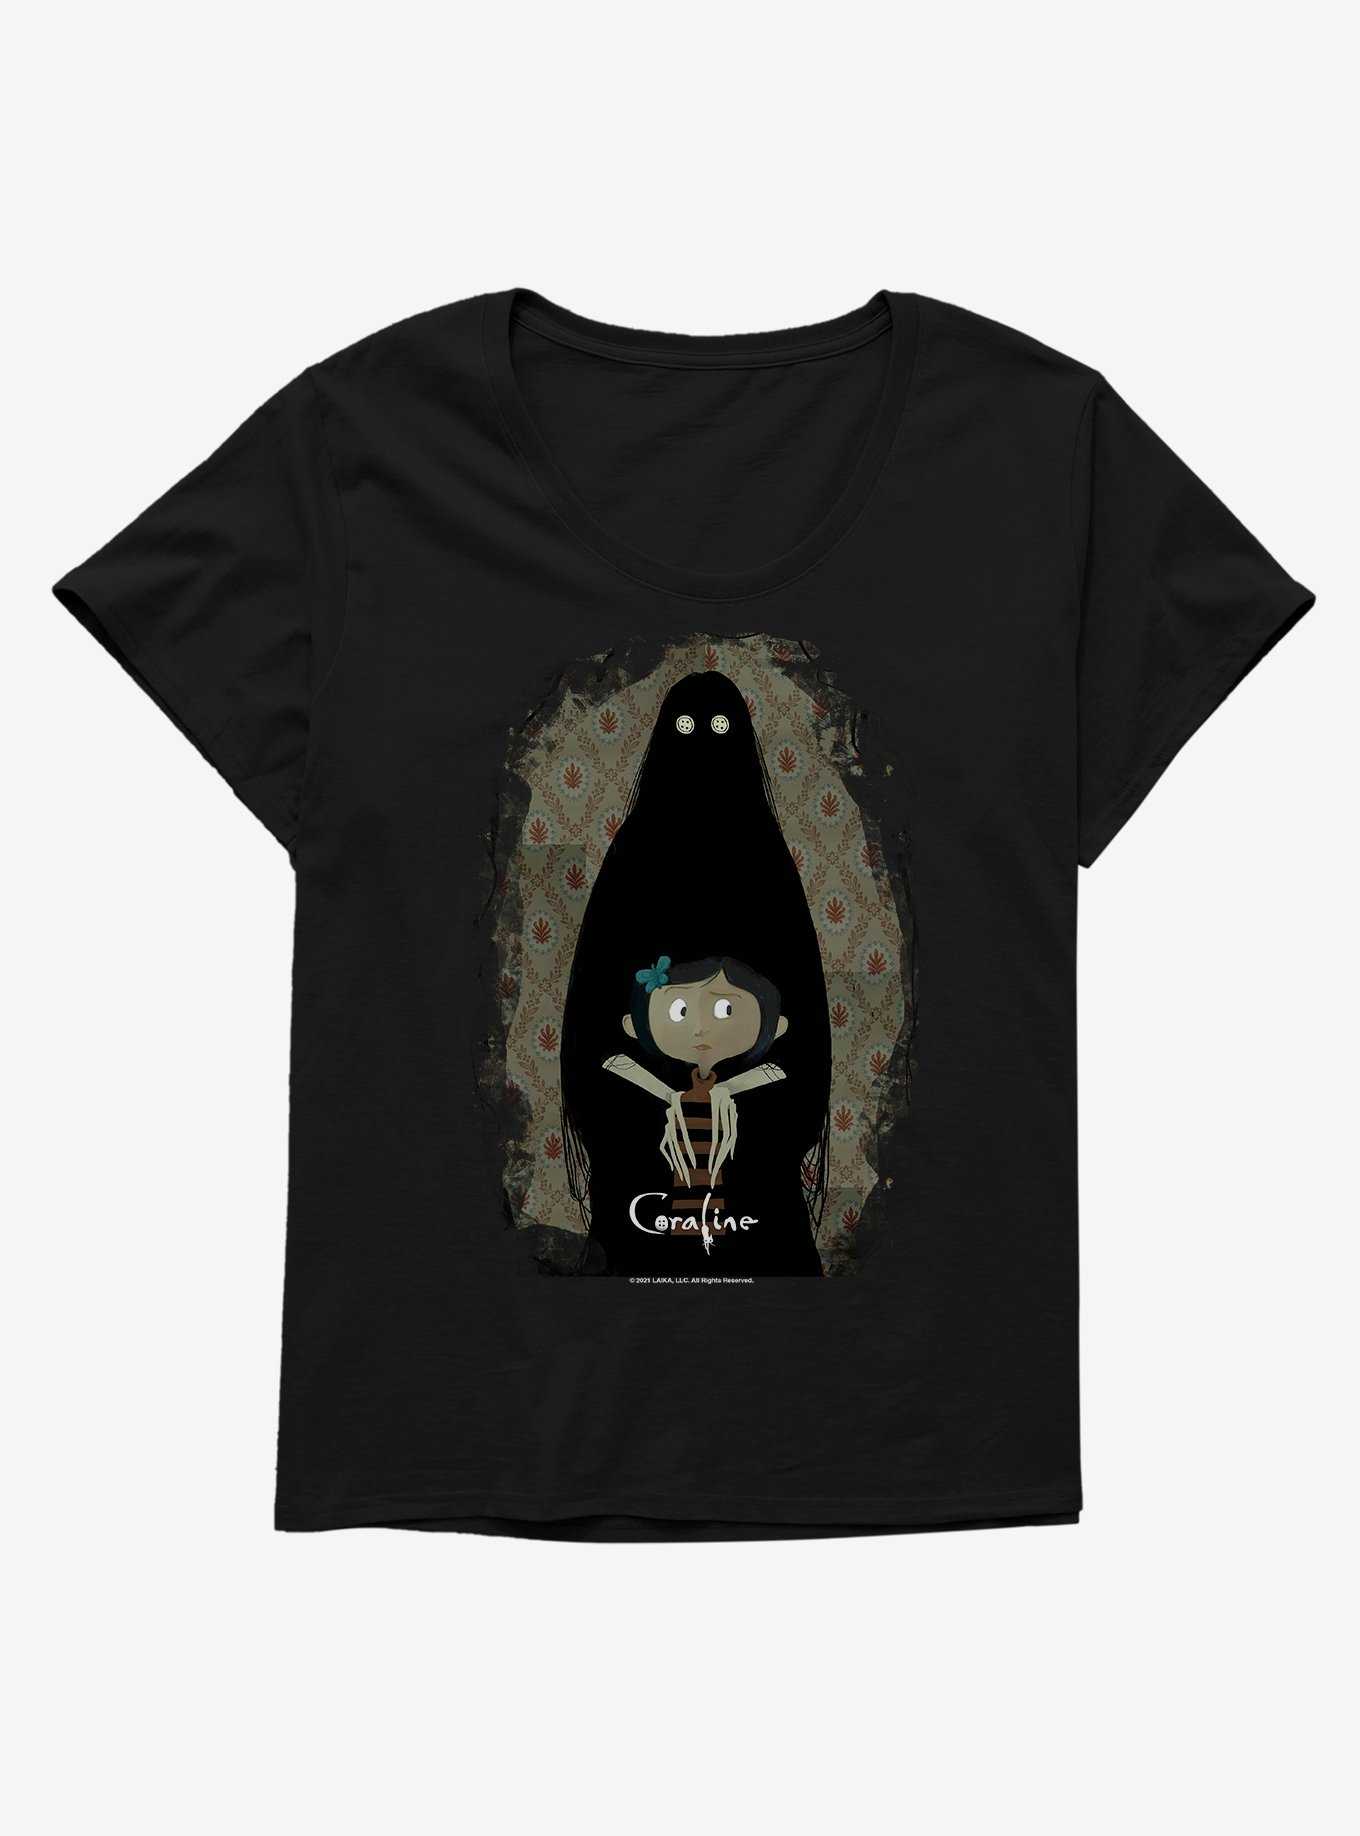 Coraline The Other Mother Shadow Womens T-Shirt Plus Size, , hi-res